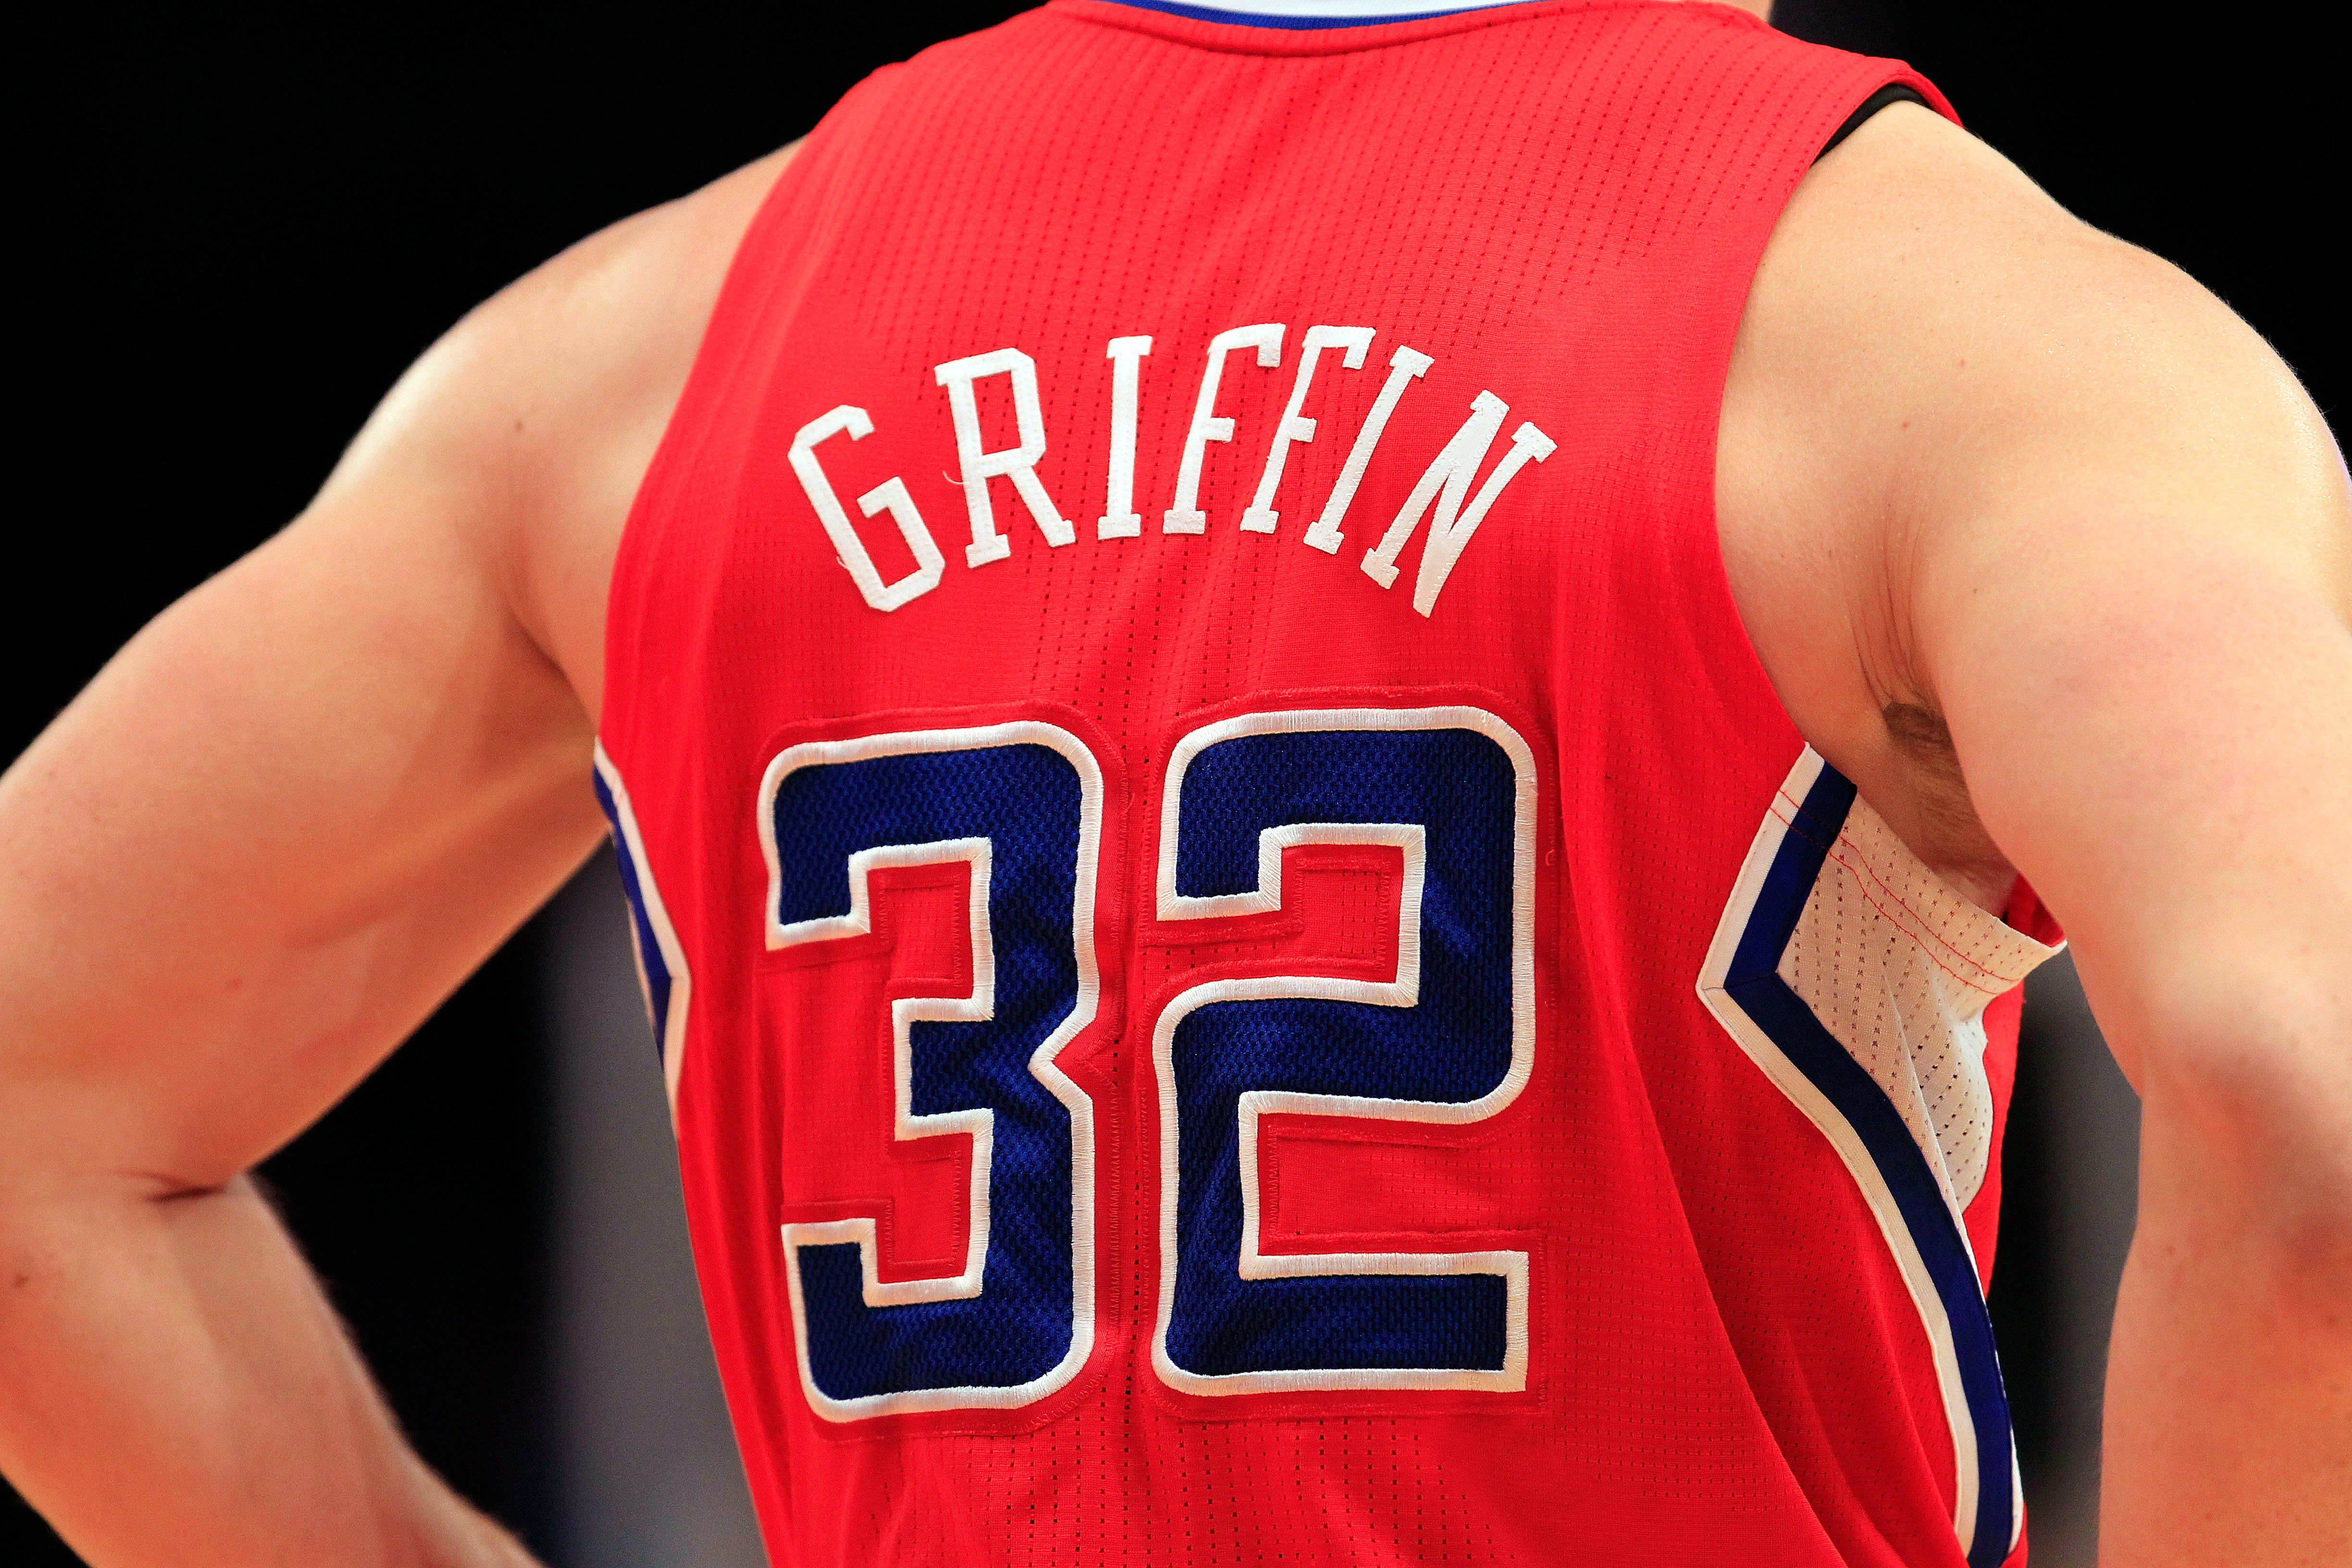 Ranking all 30 NBA jerseys: Which team reigns supreme?